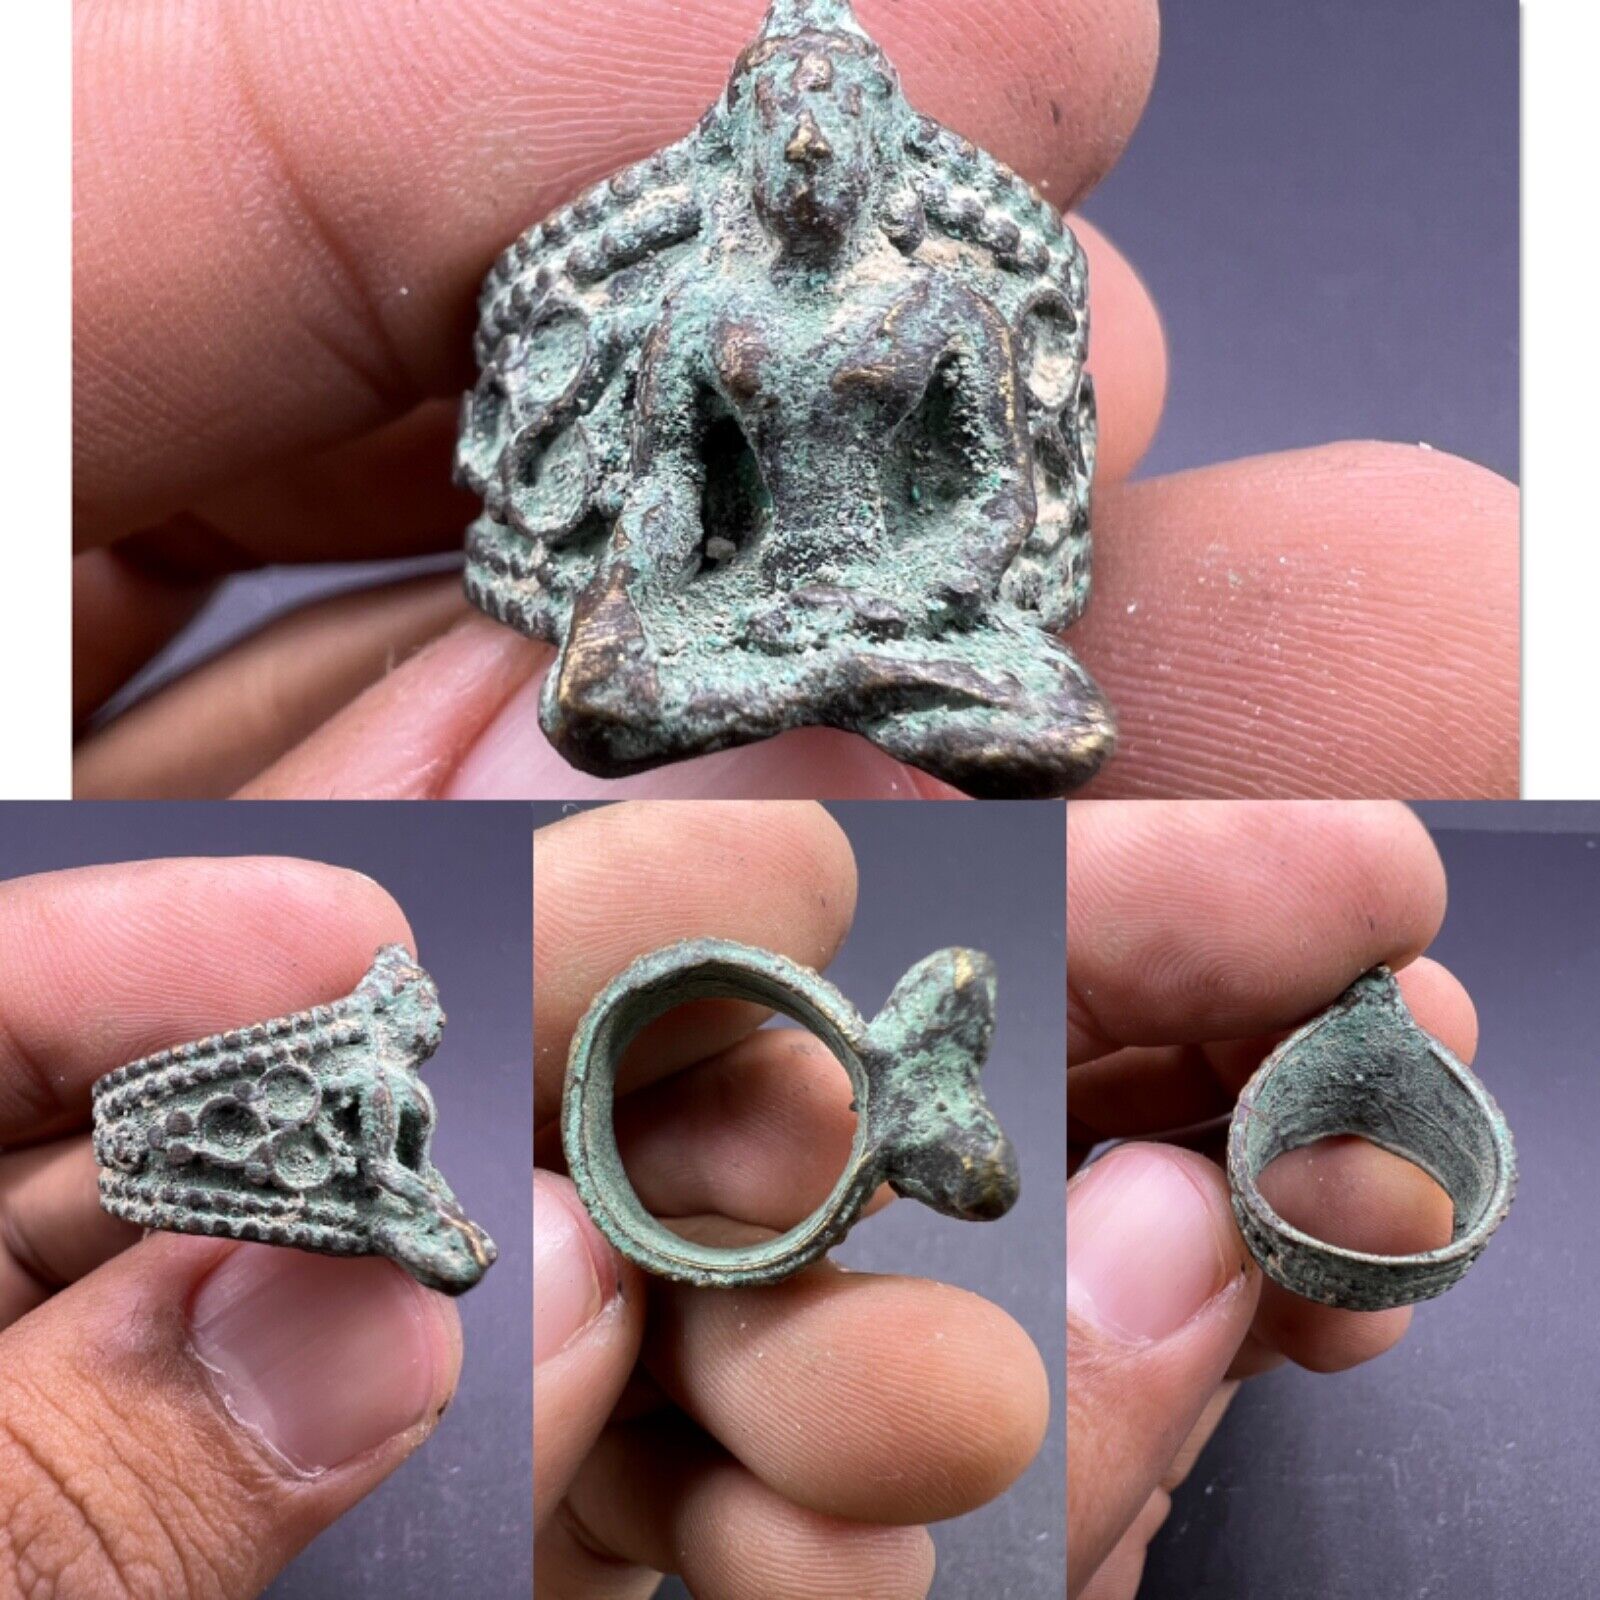 A Very Fine Old Unique Ghandhra Era Bronze Ring With Buddha Statue